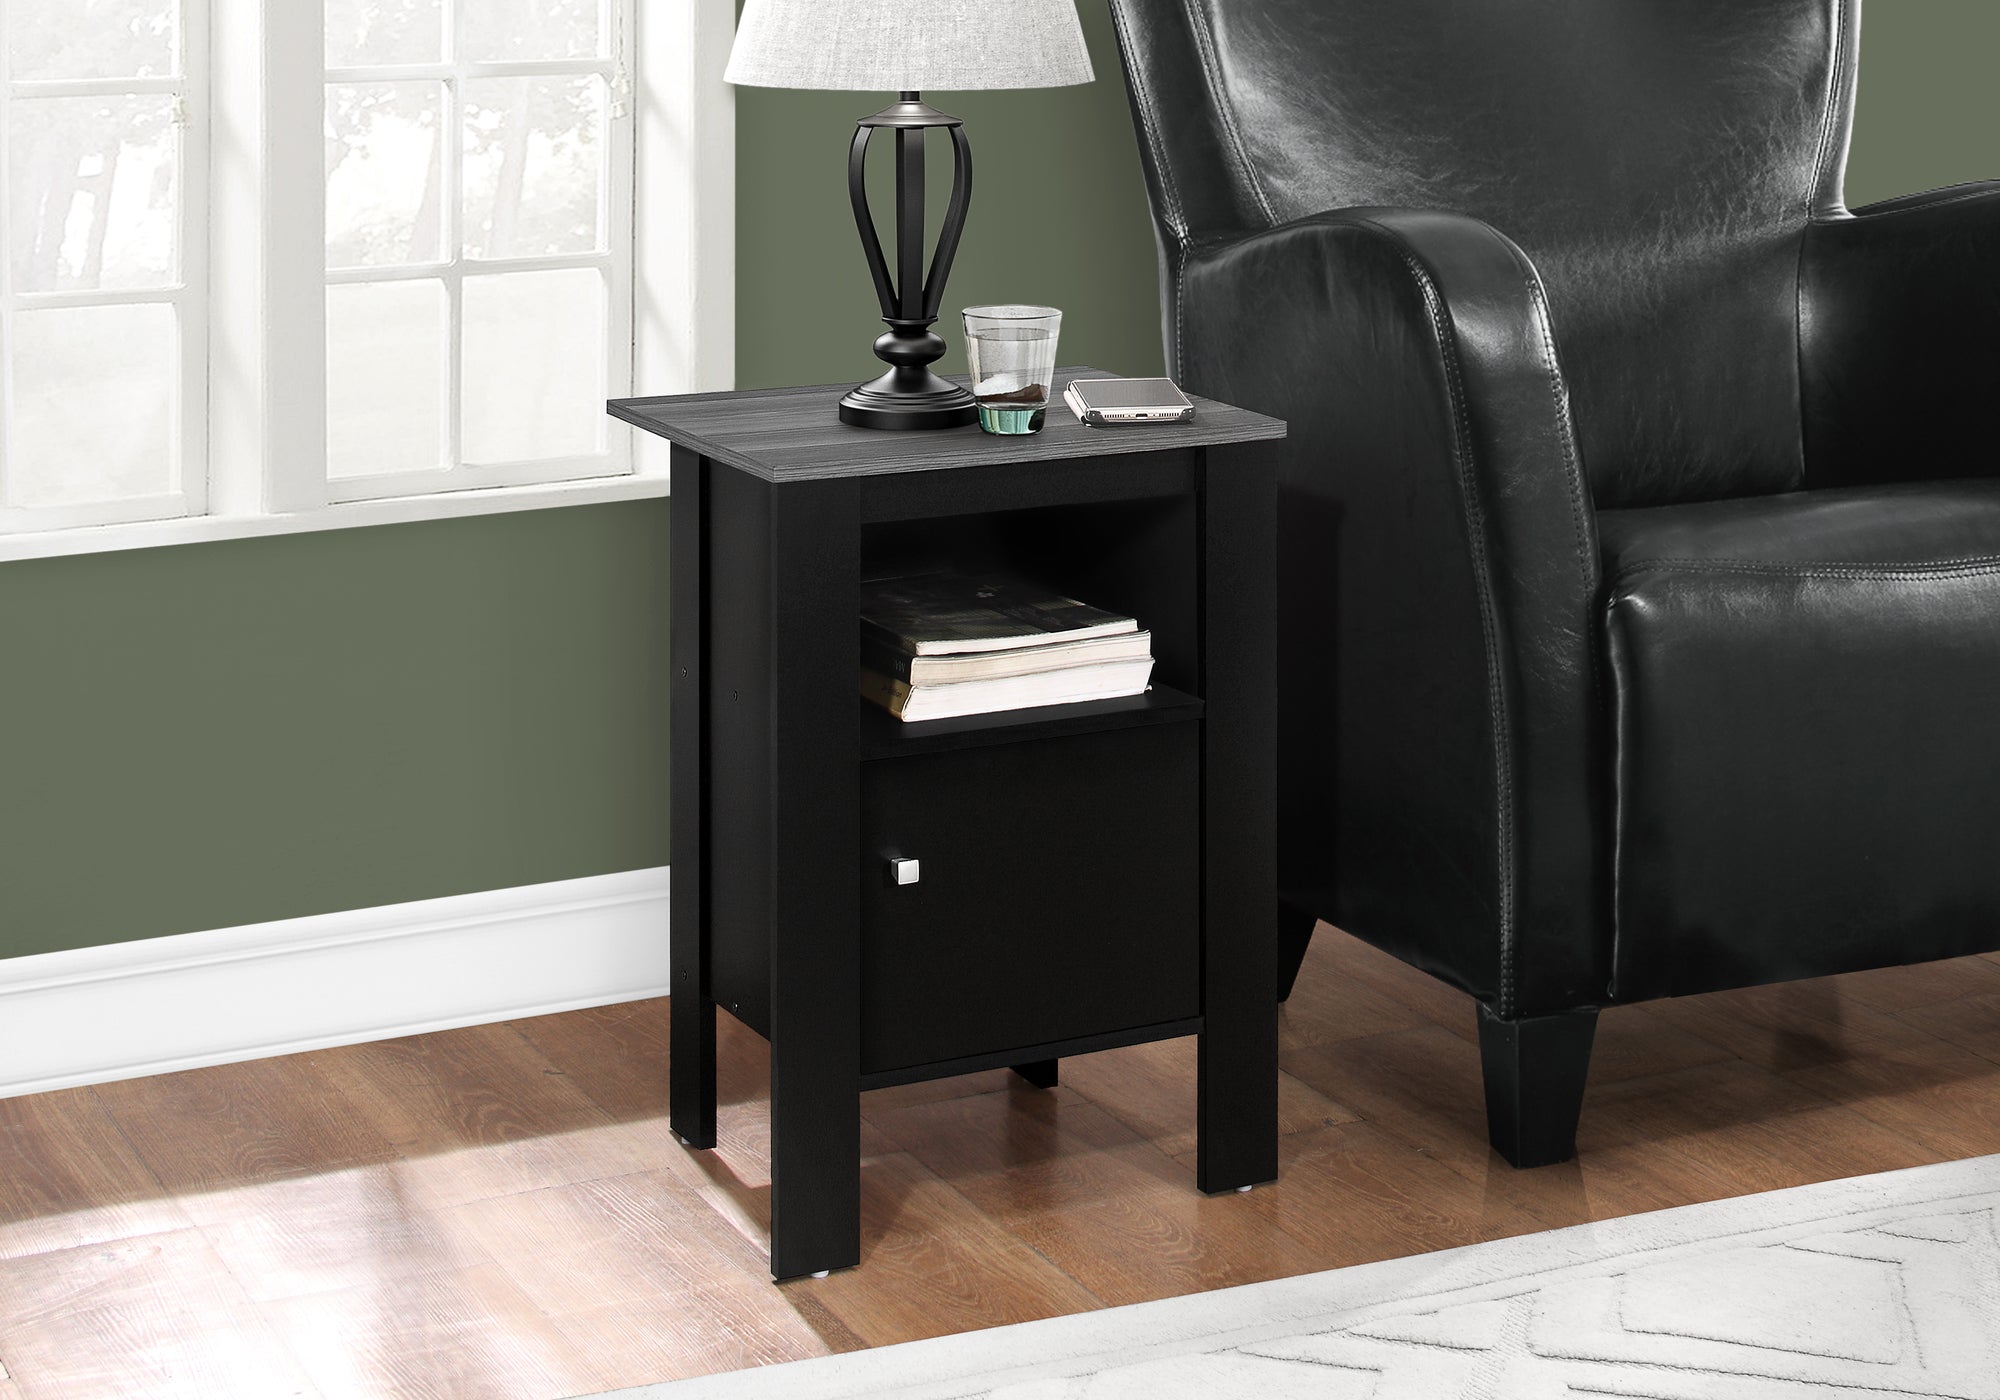 MN-162134    Accent Table, Side, End, Nightstand, Lamp, Living Room, Bedroom, Laminate, Black, Grey, Contemporary, Modern